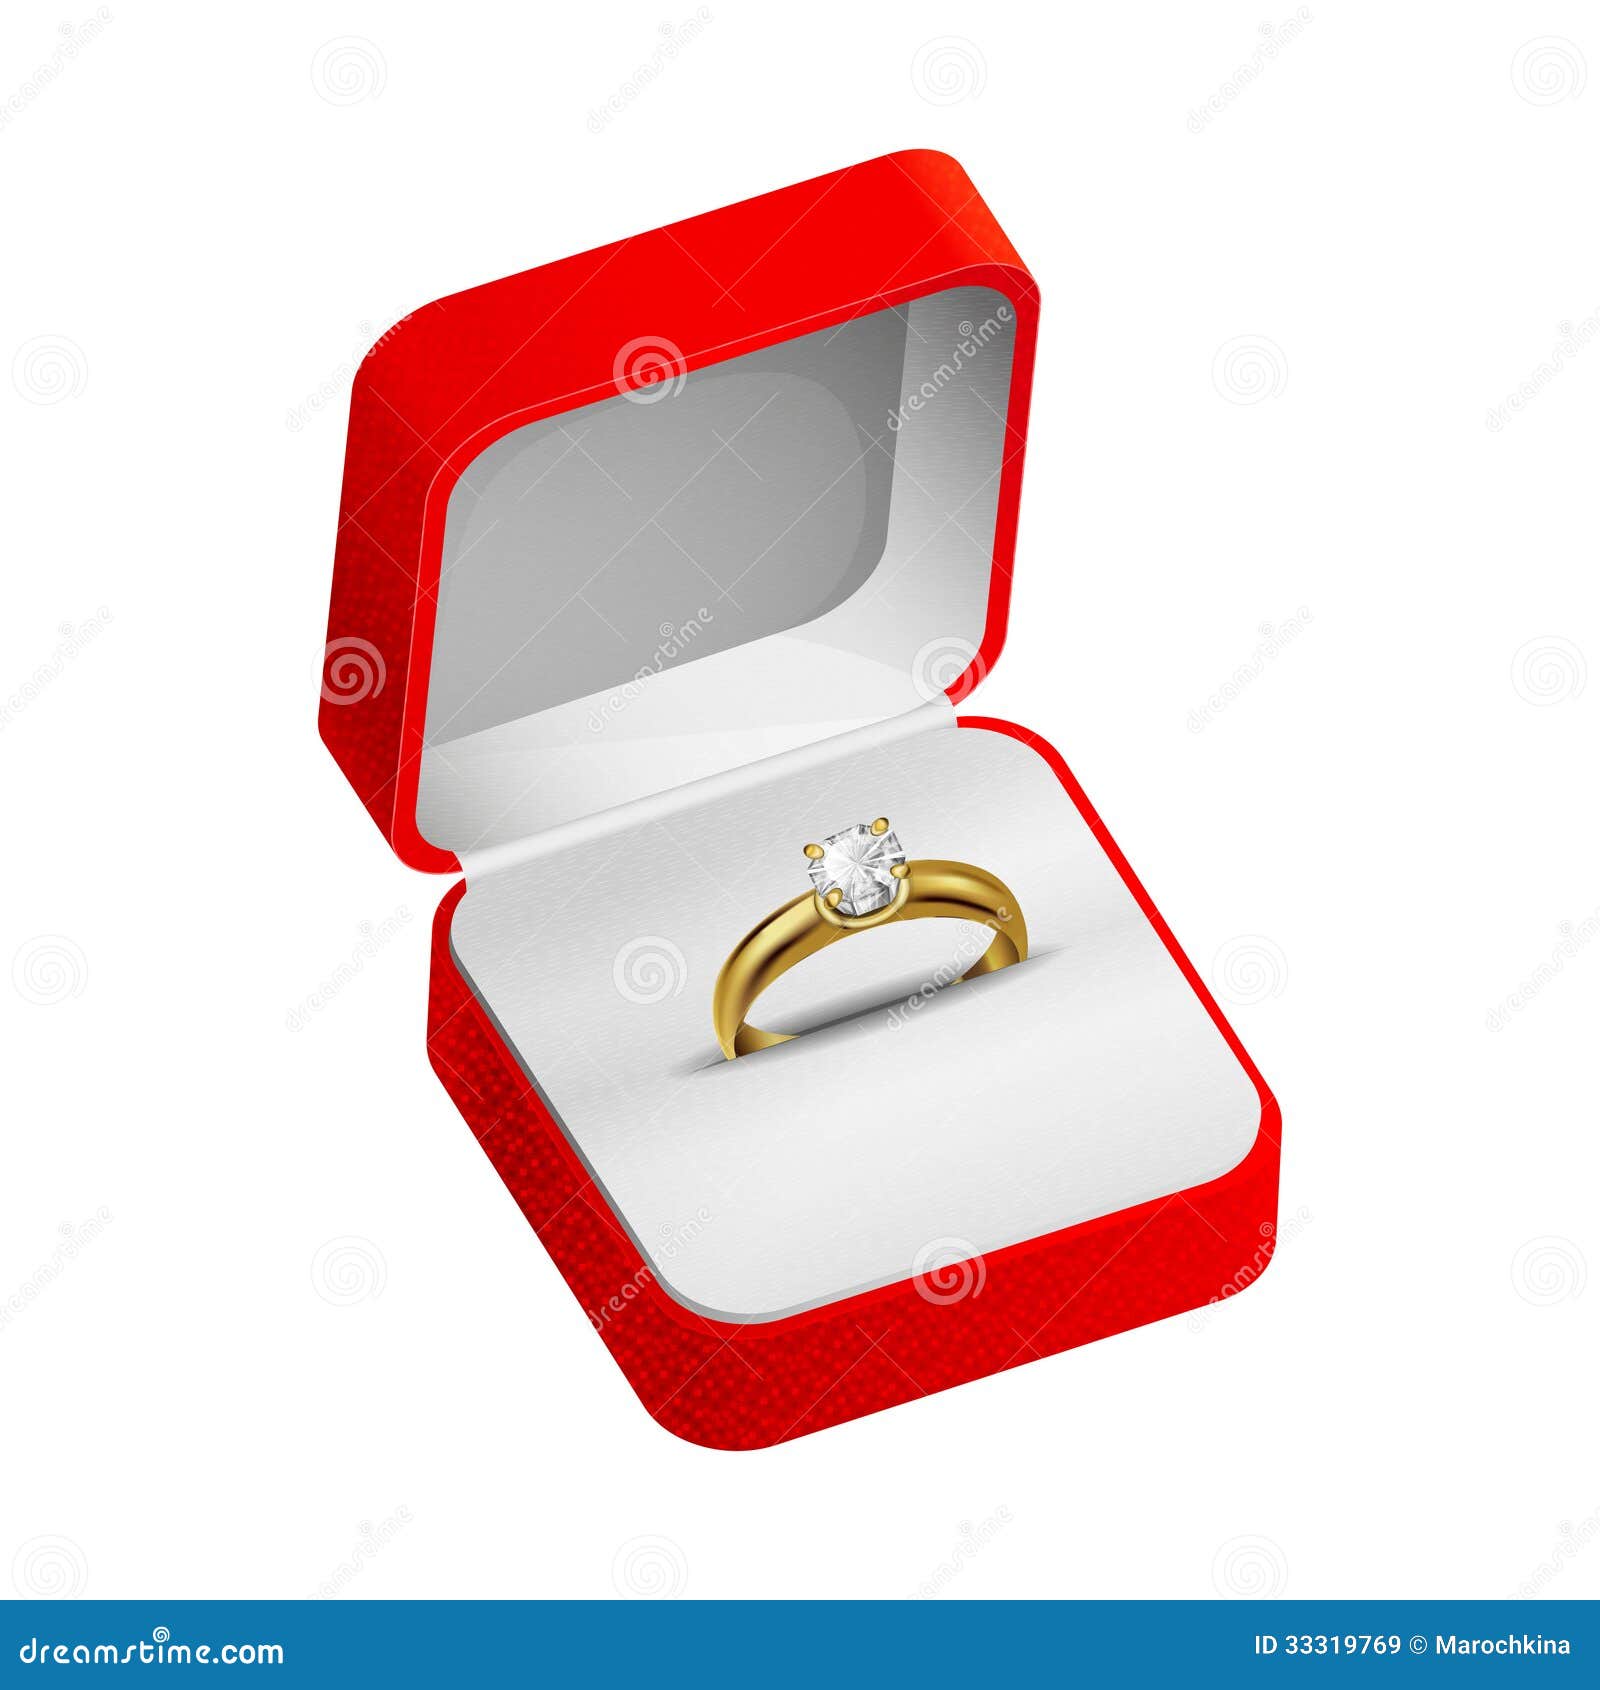 Gold ring in a red box stock illustration. Illustration of love - 33319769